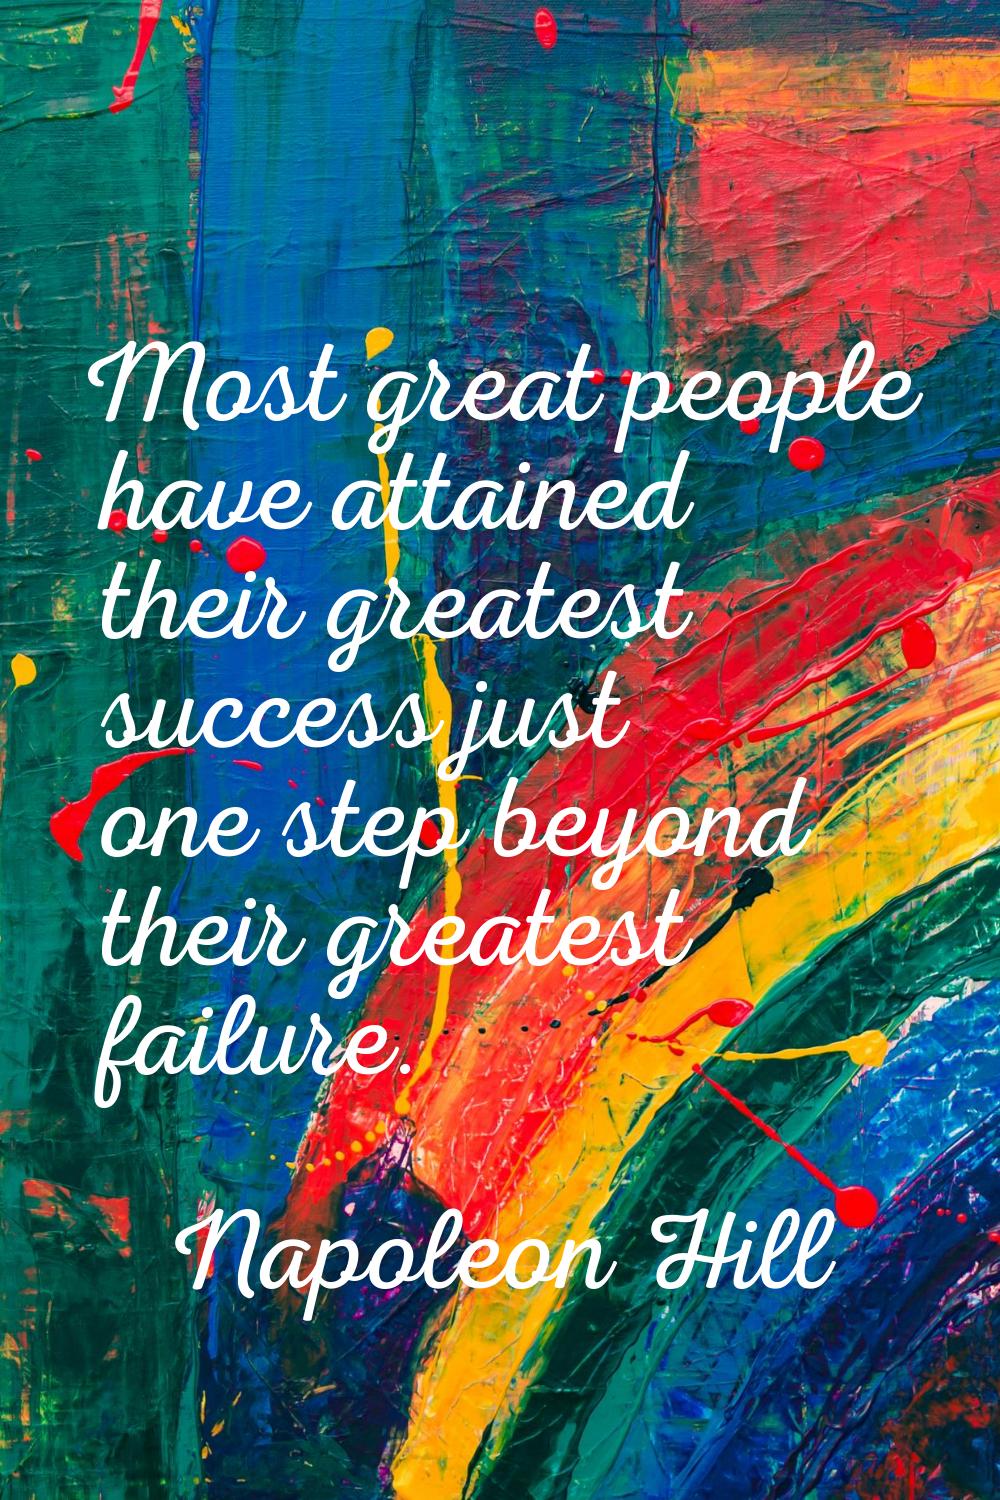 Most great people have attained their greatest success just one step beyond their greatest failure.